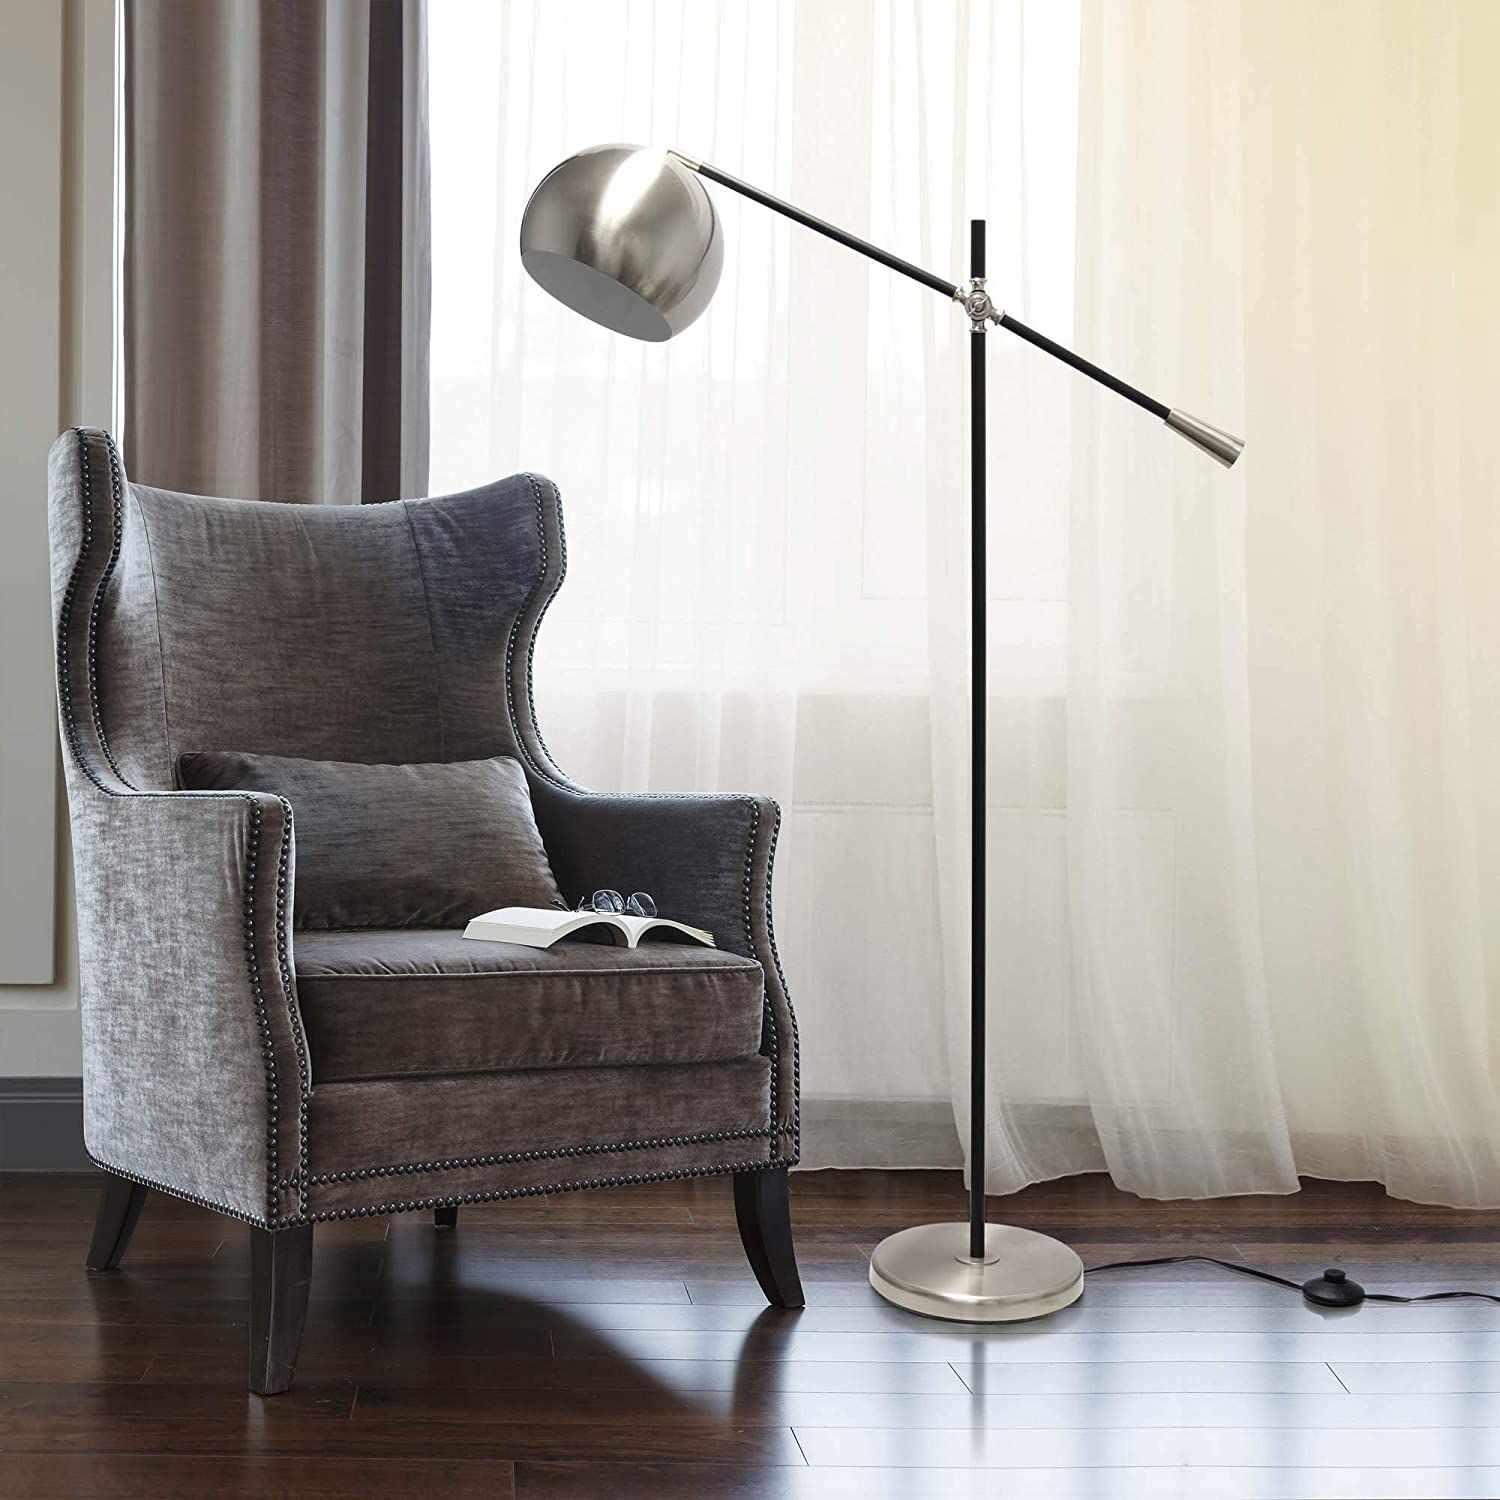 Lalia Home Decorative Black Matte Swivel Floor Lamp with Inner White Dome Shade, Brushed Nickel